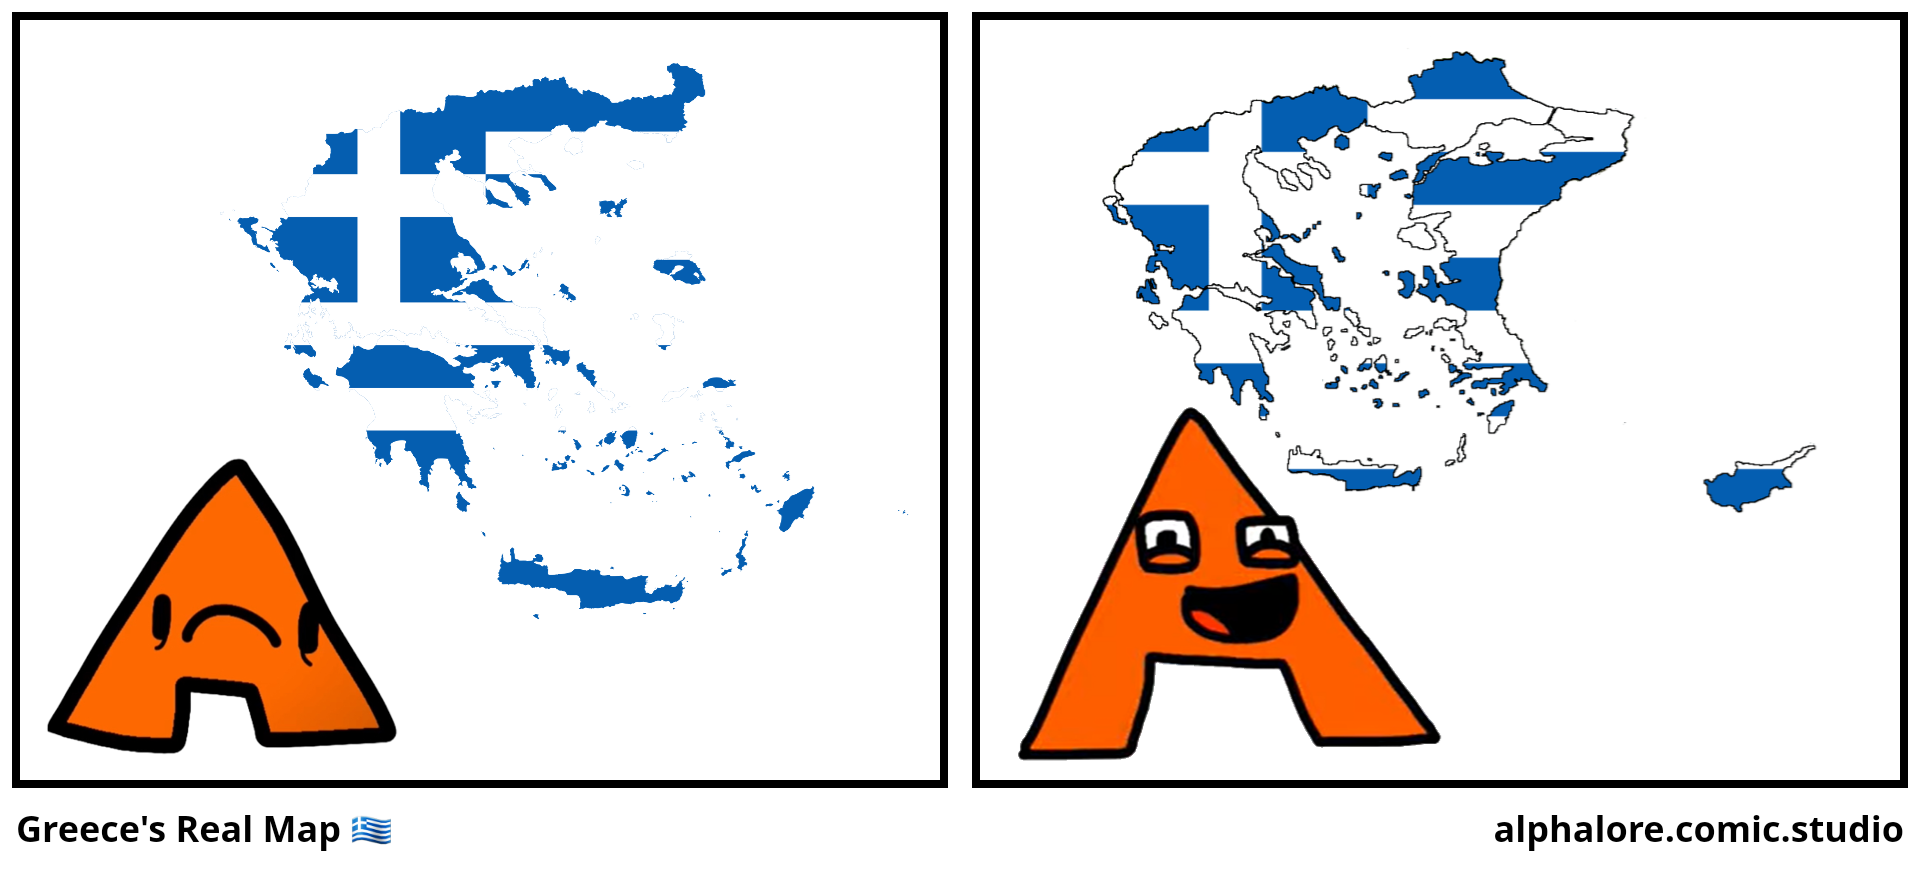 Greece's Real Map 🇬🇷 